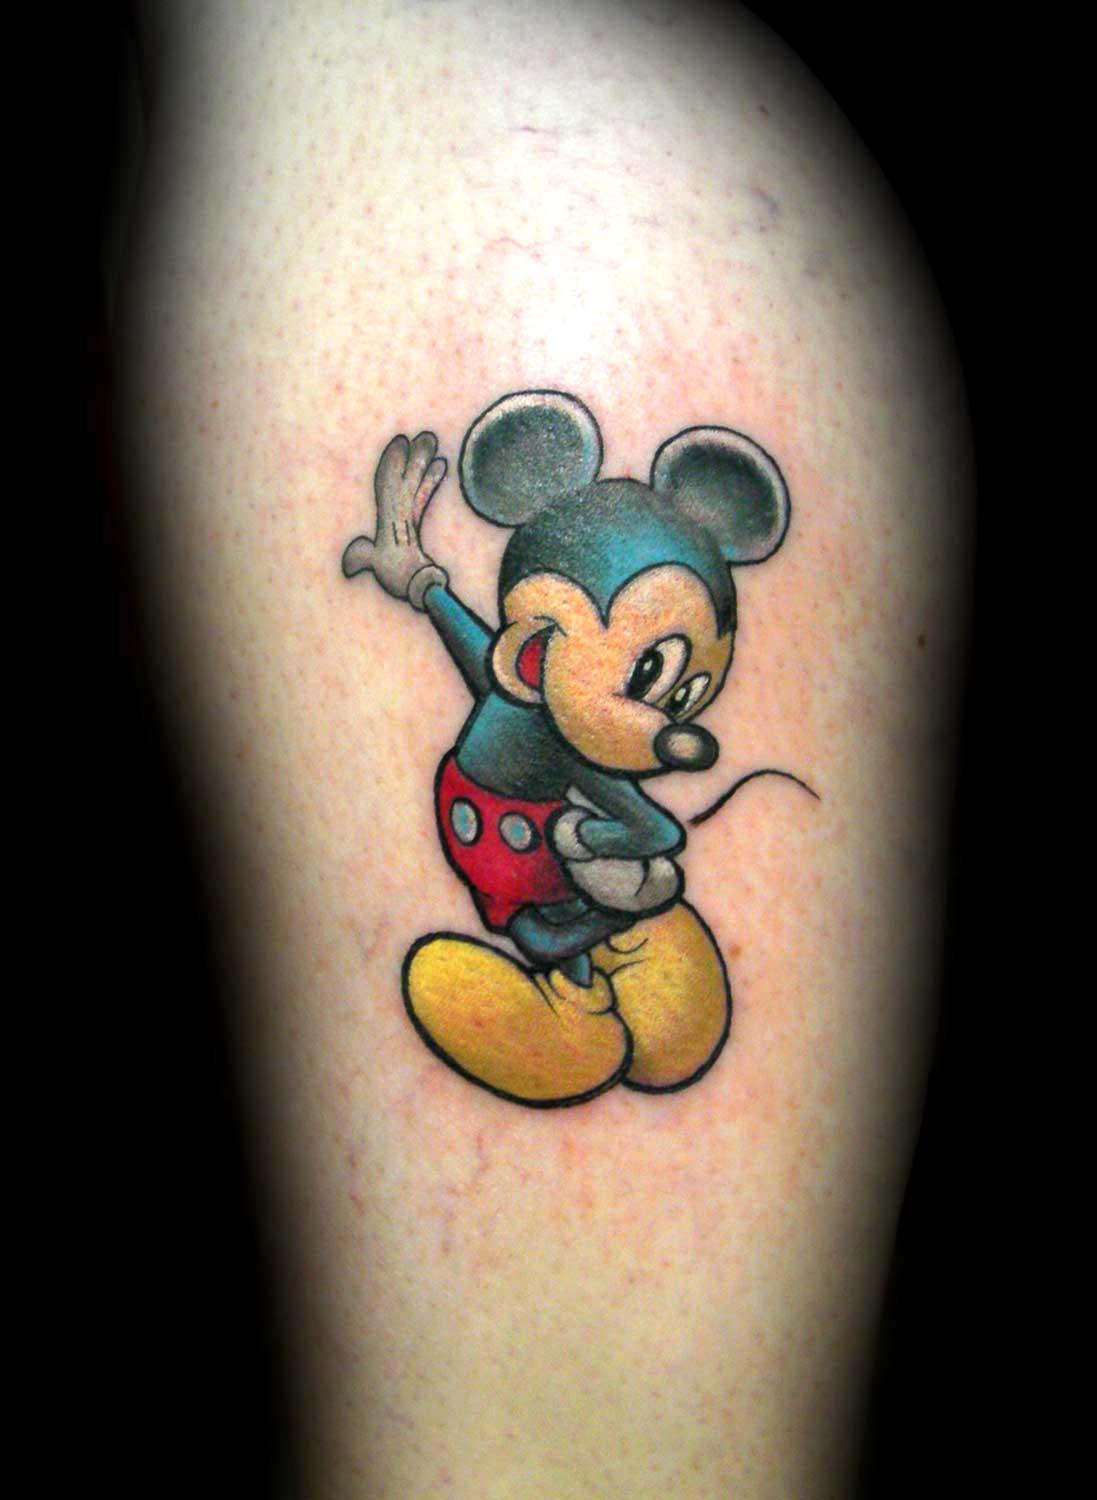 Full color Mickey Mouse tattoo